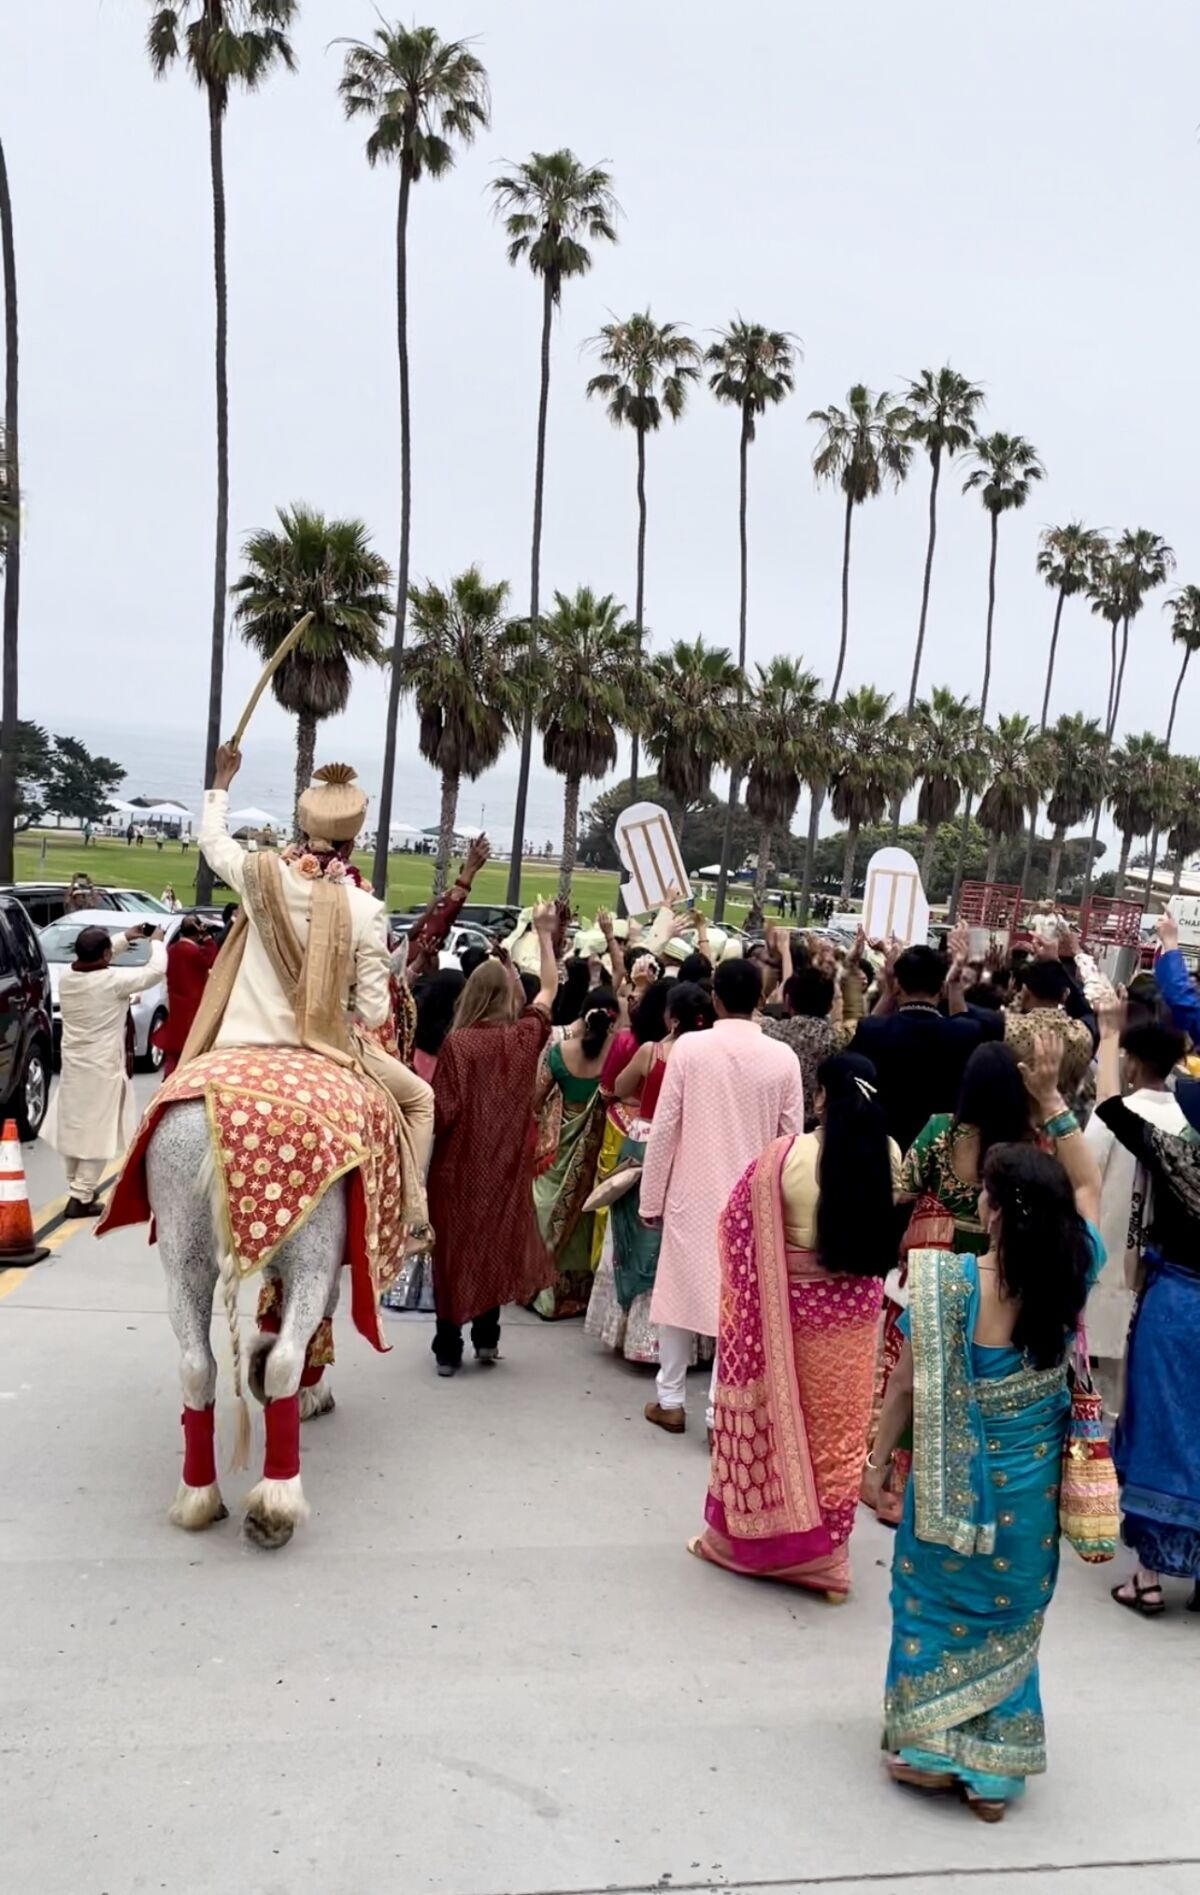 The La Jolla traffic board approved guidelines for private events in The Village, such as this Indian baraat on June 25.